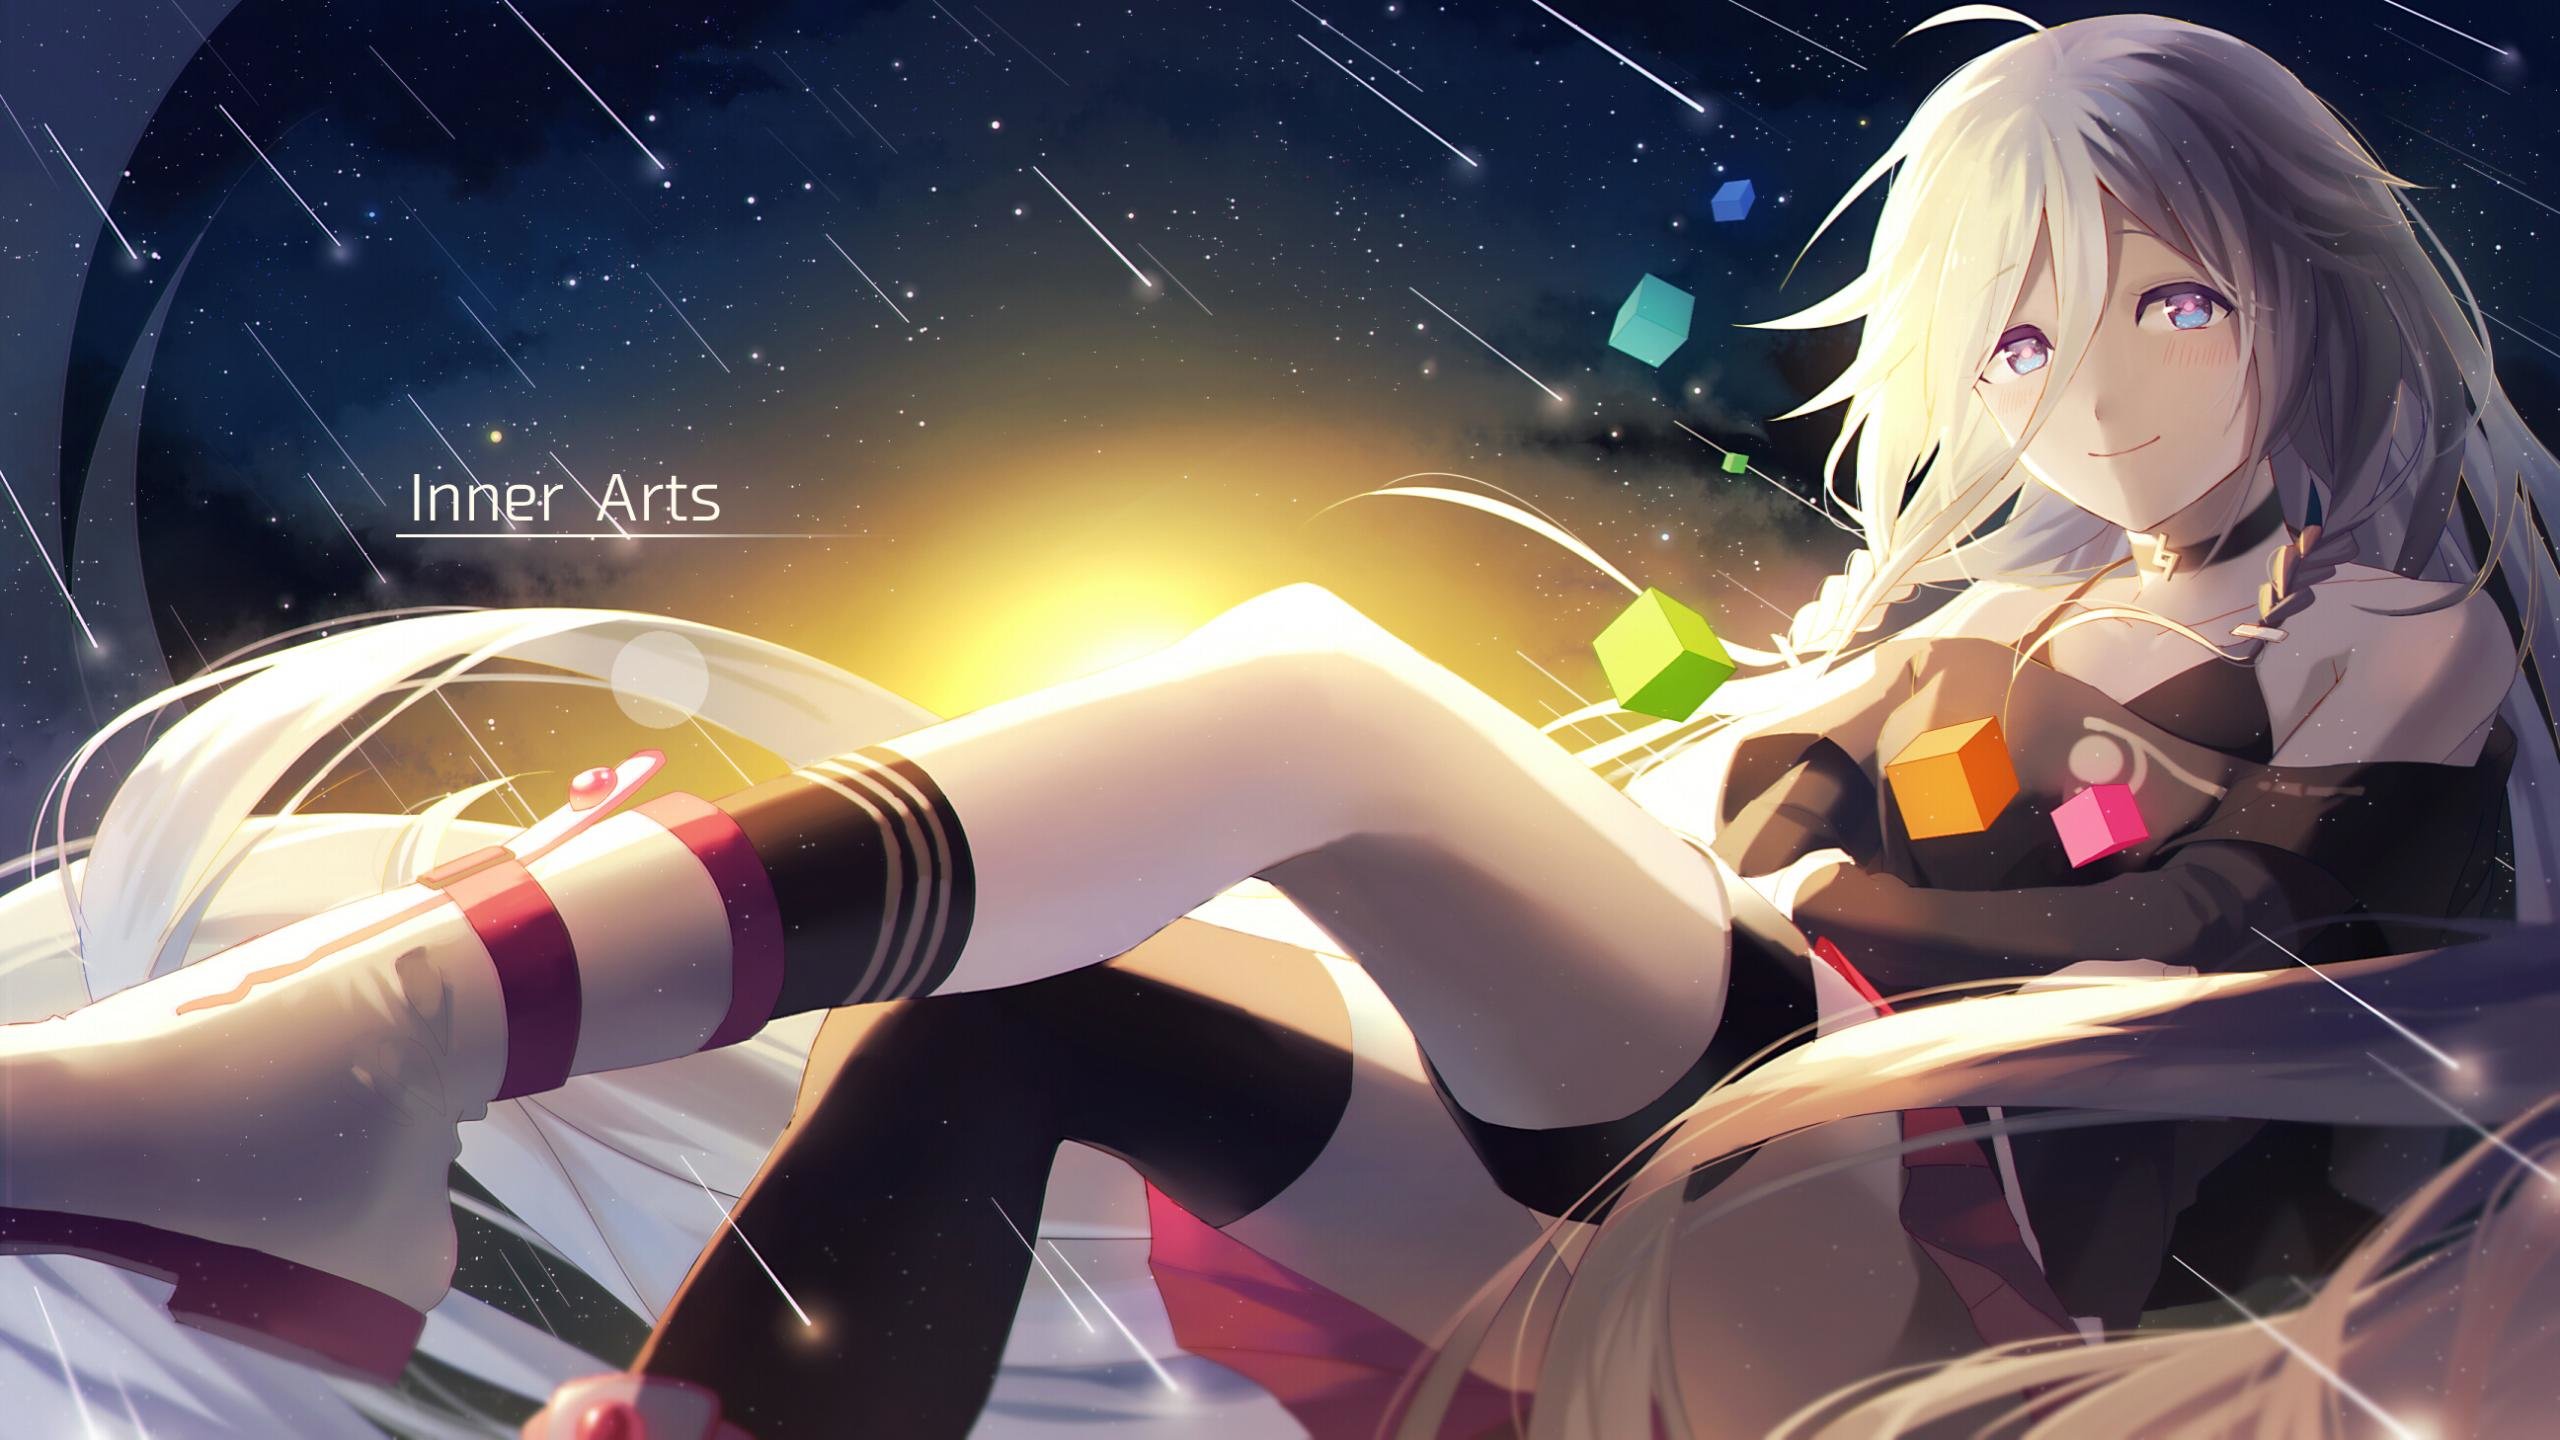 High resolution IA (Vocaloid) hd 2560x1440 background ID:883 for PC